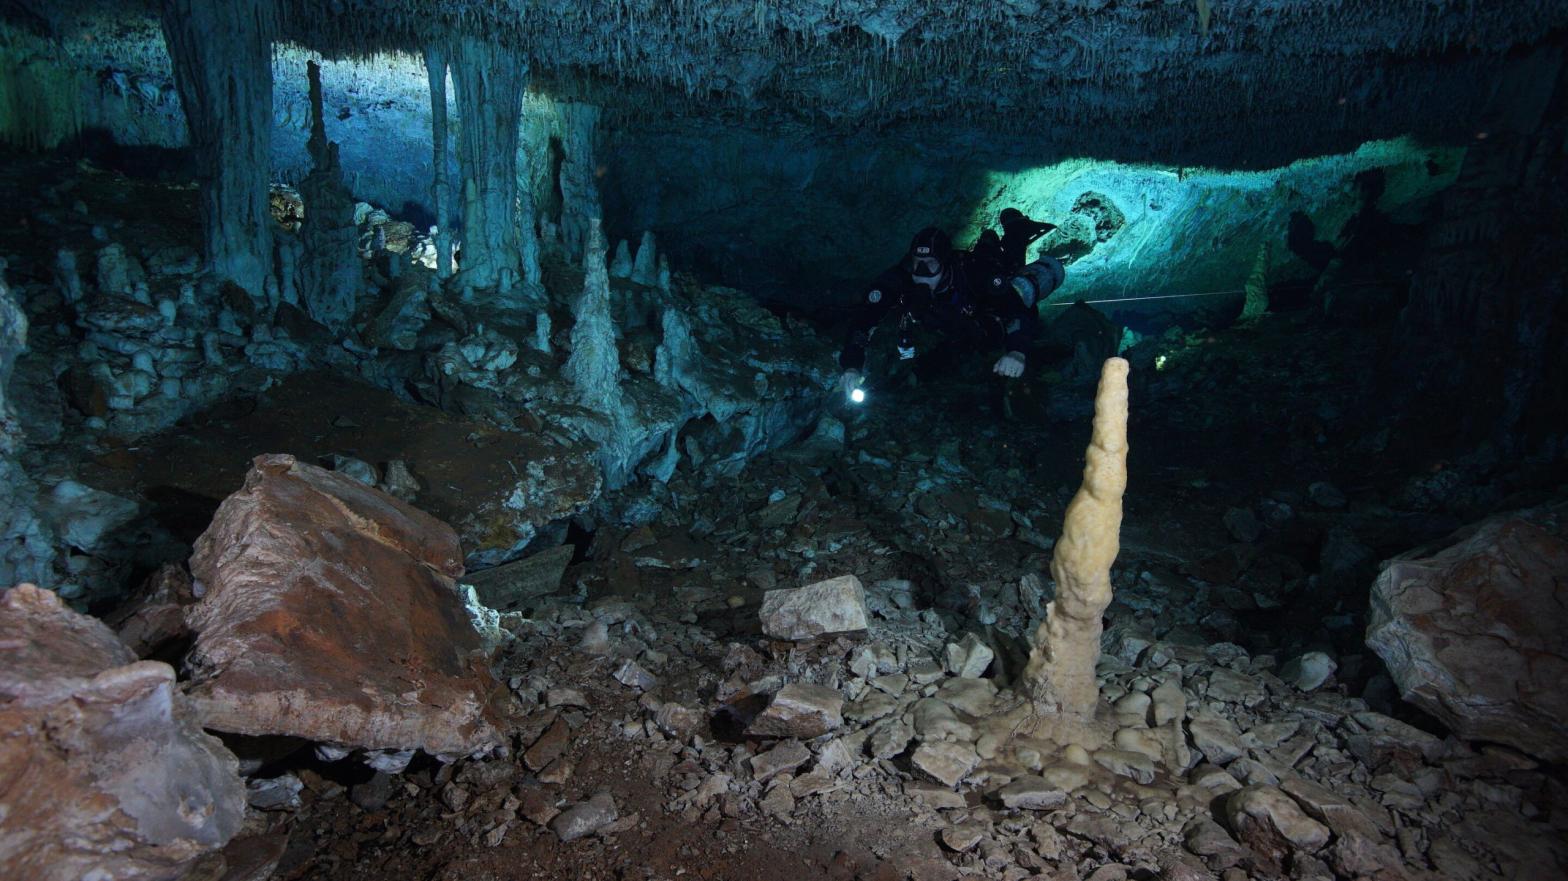 A diver exploring the submerged cave.  (Image: CINDAQ)